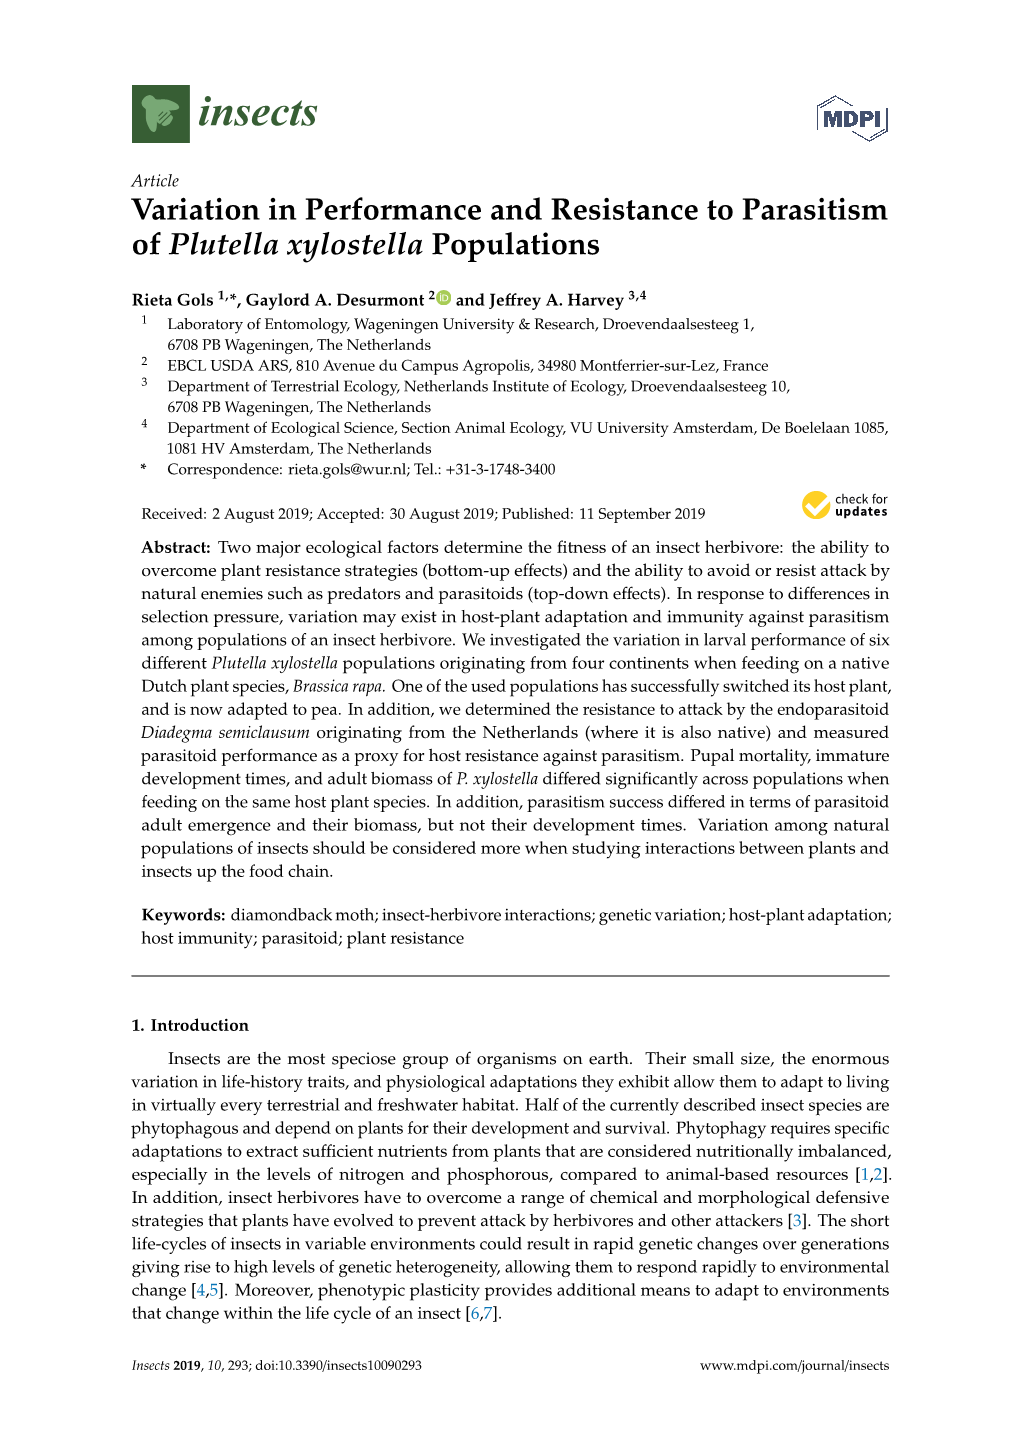 Variation in Performance and Resistance to Parasitism of Plutella Xylostella Populations